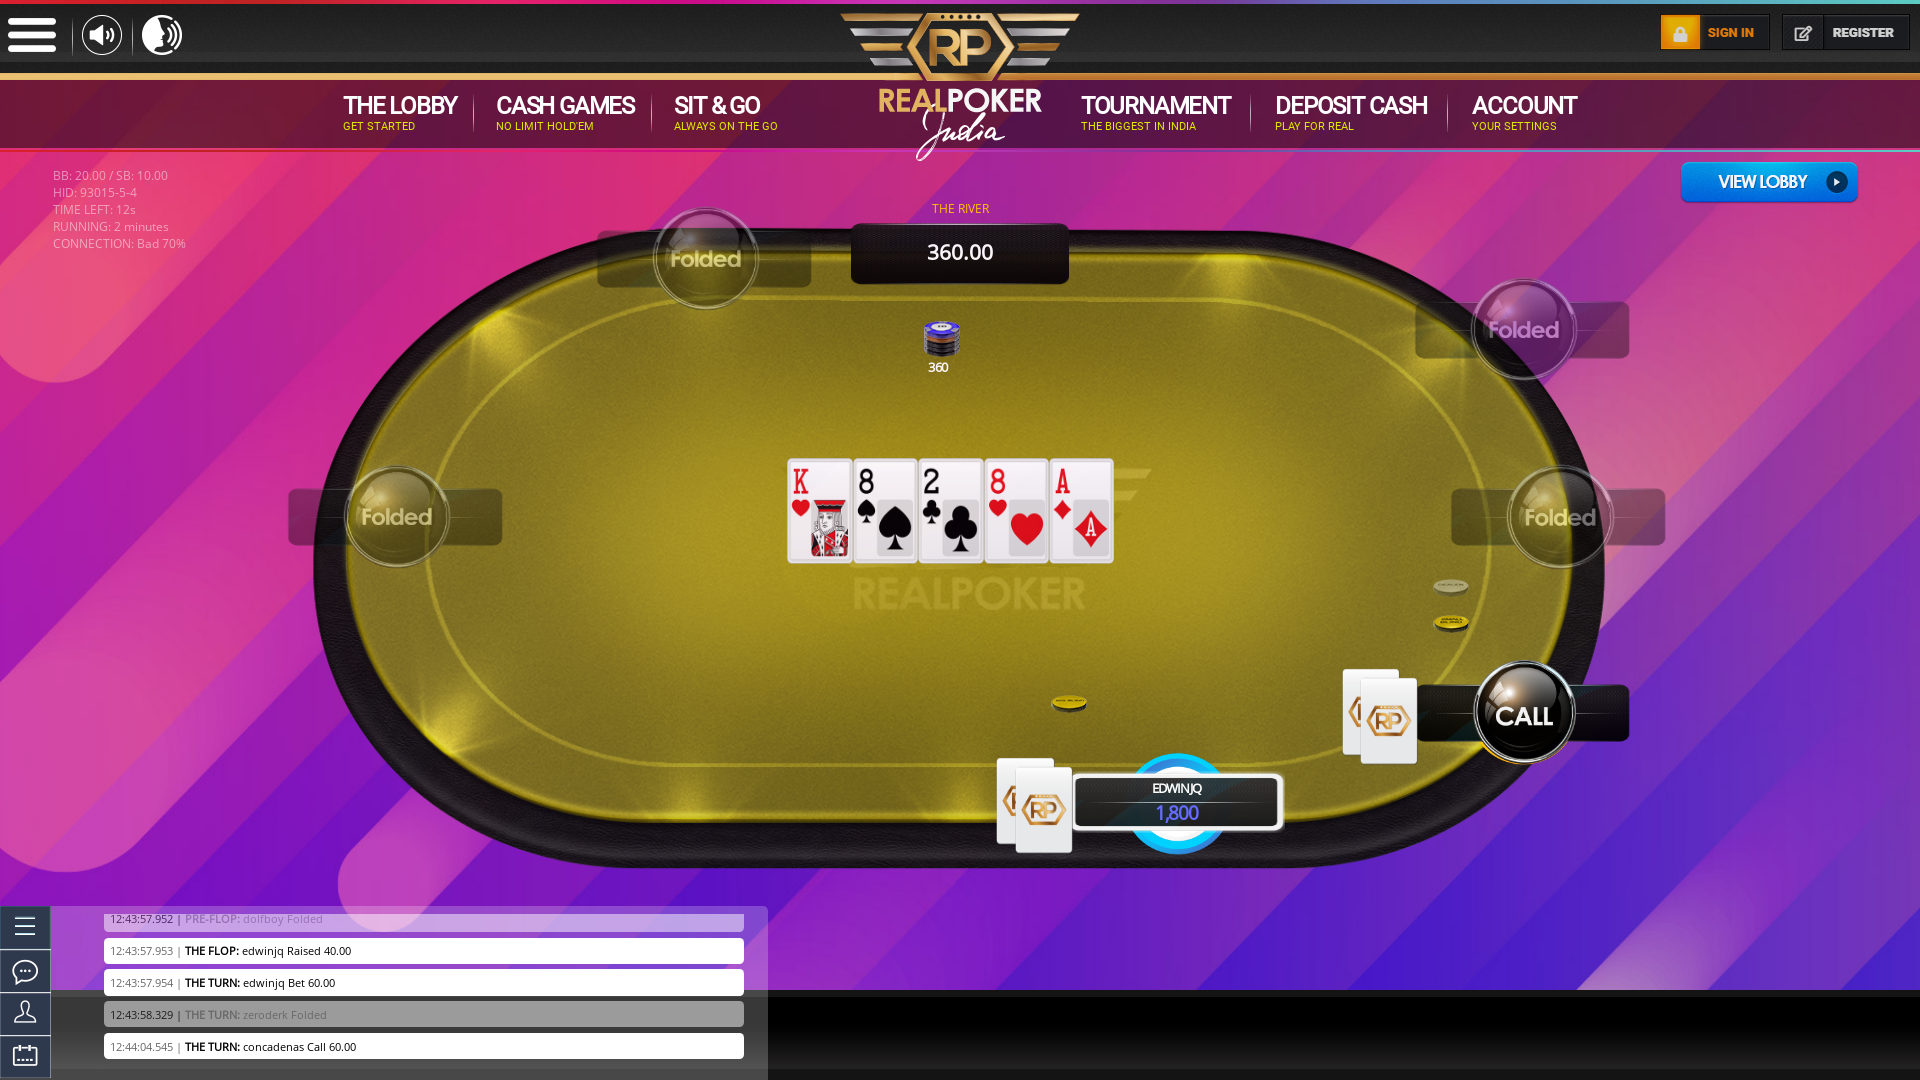 Real poker 10 player table in the 2nd minute of the match